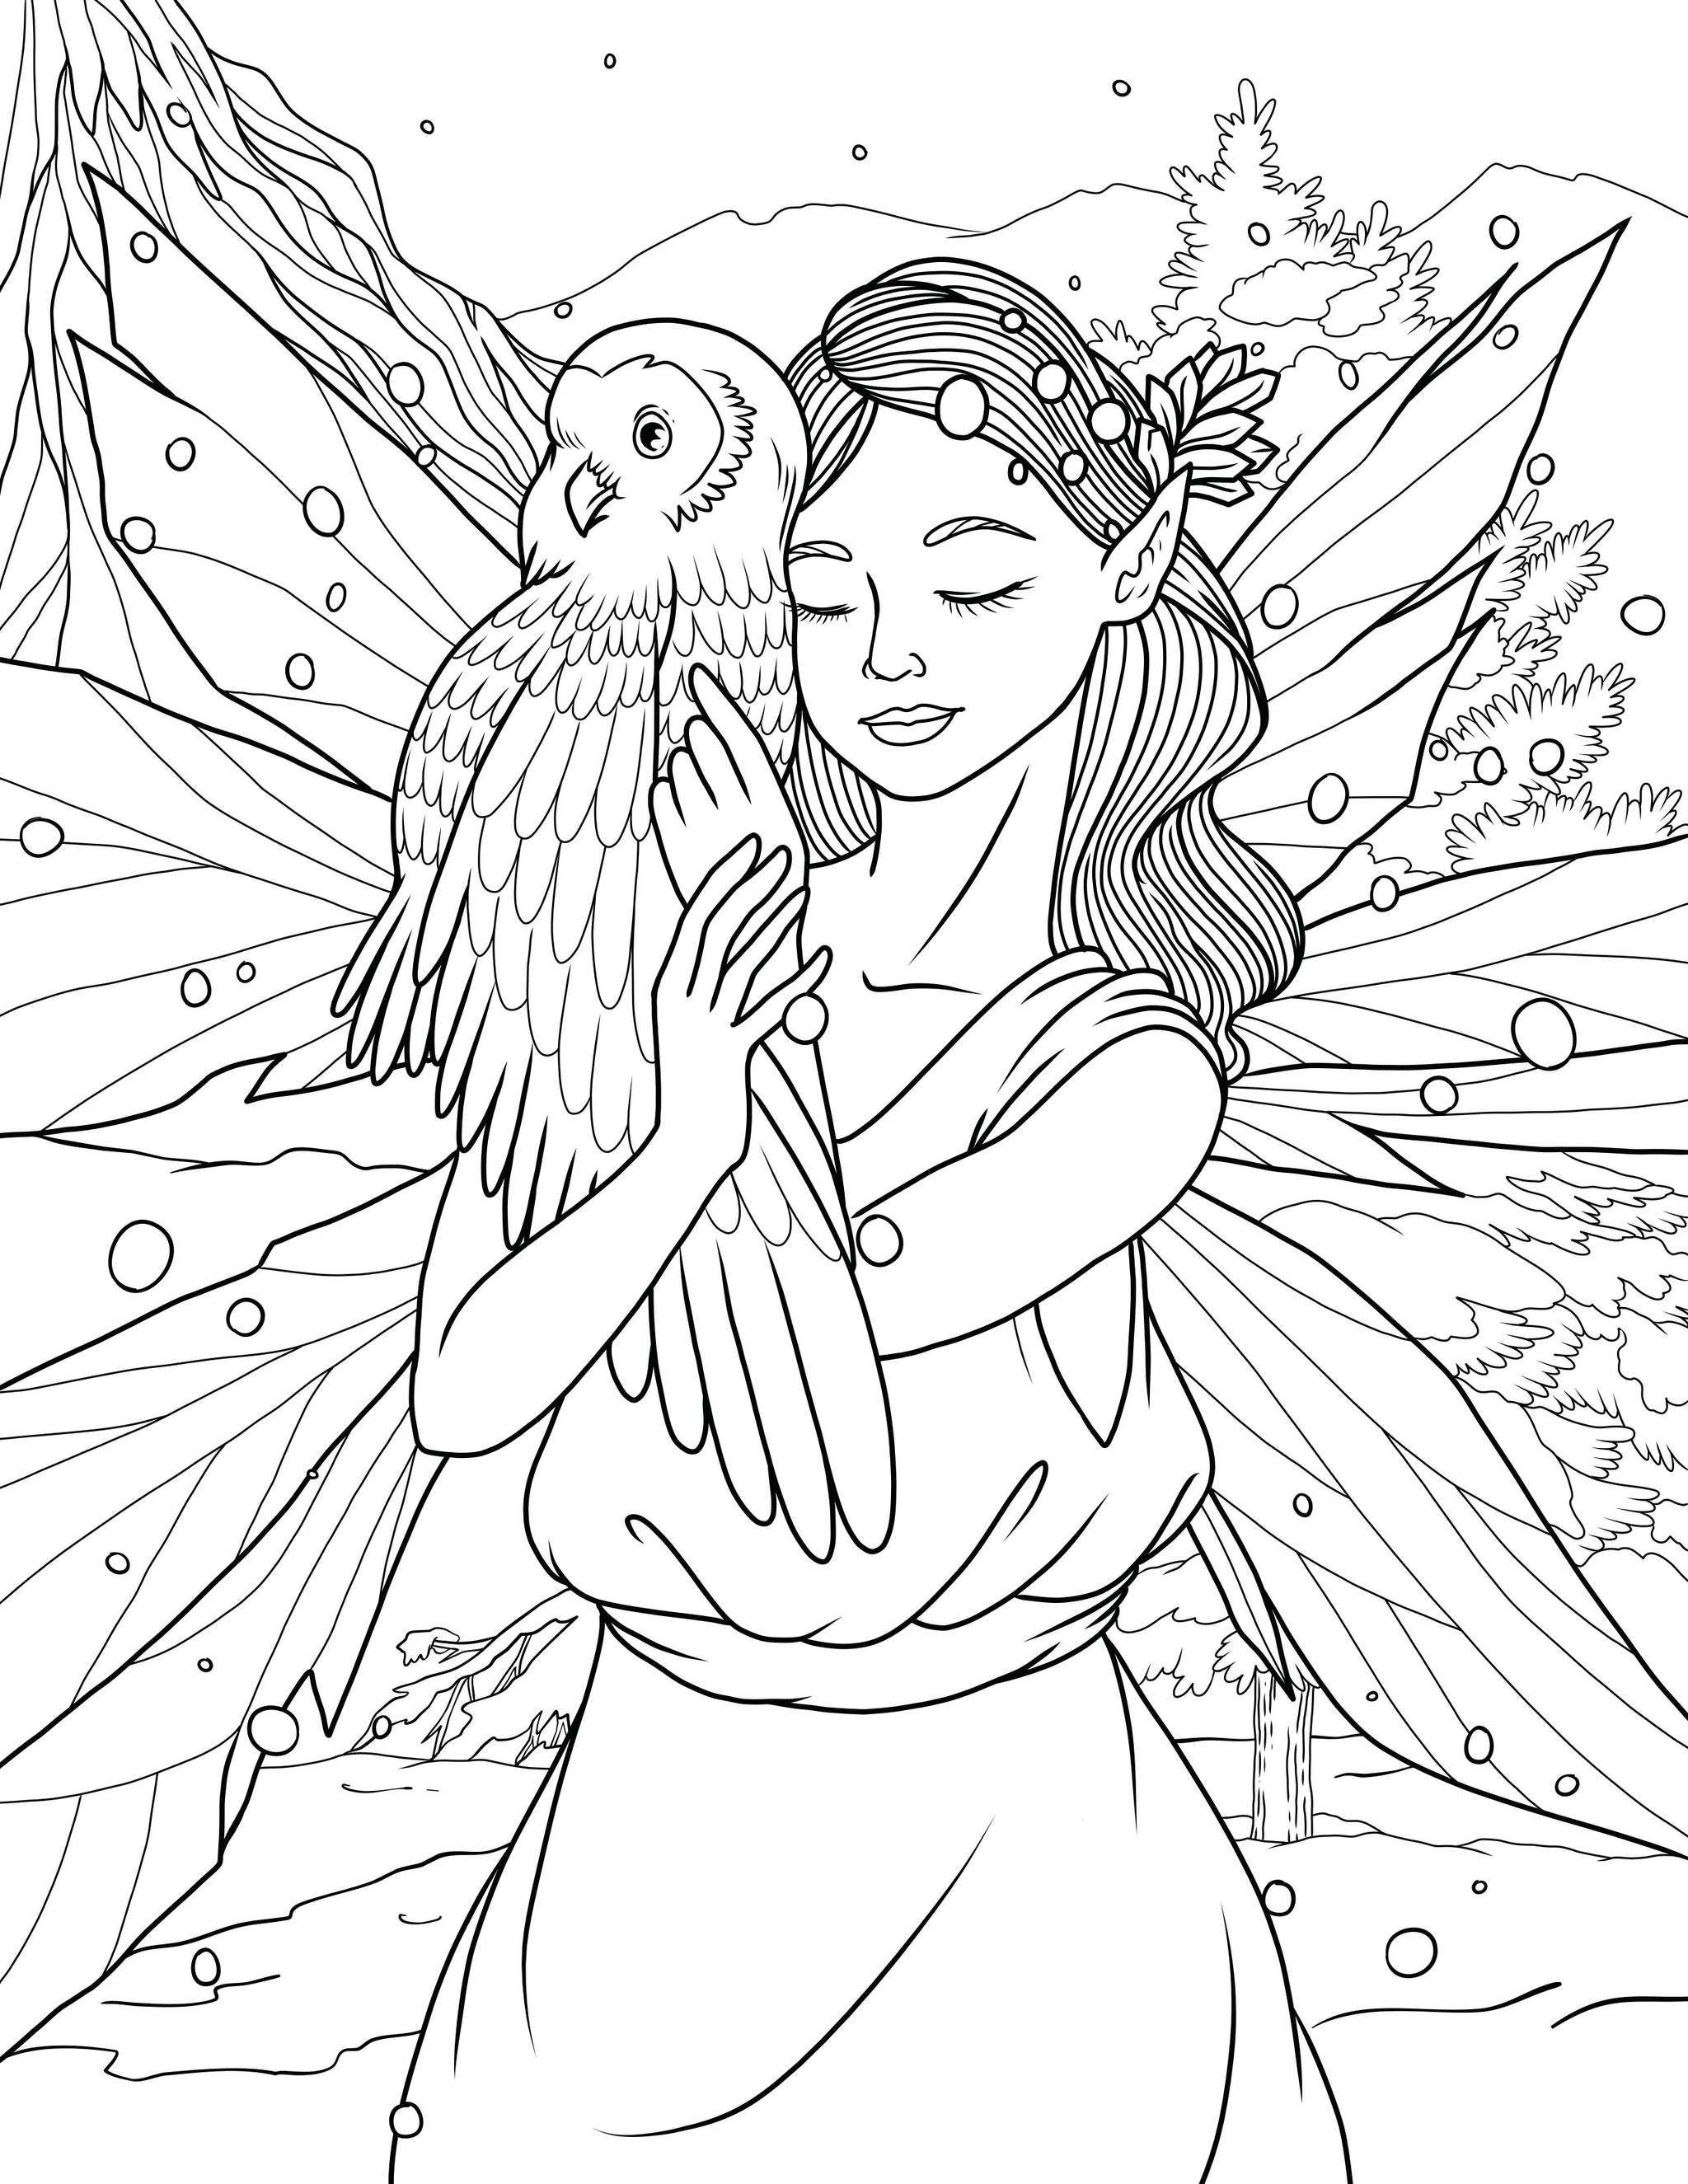 Freebie Friday 01-15-21 Snow Fairy Coloring Page